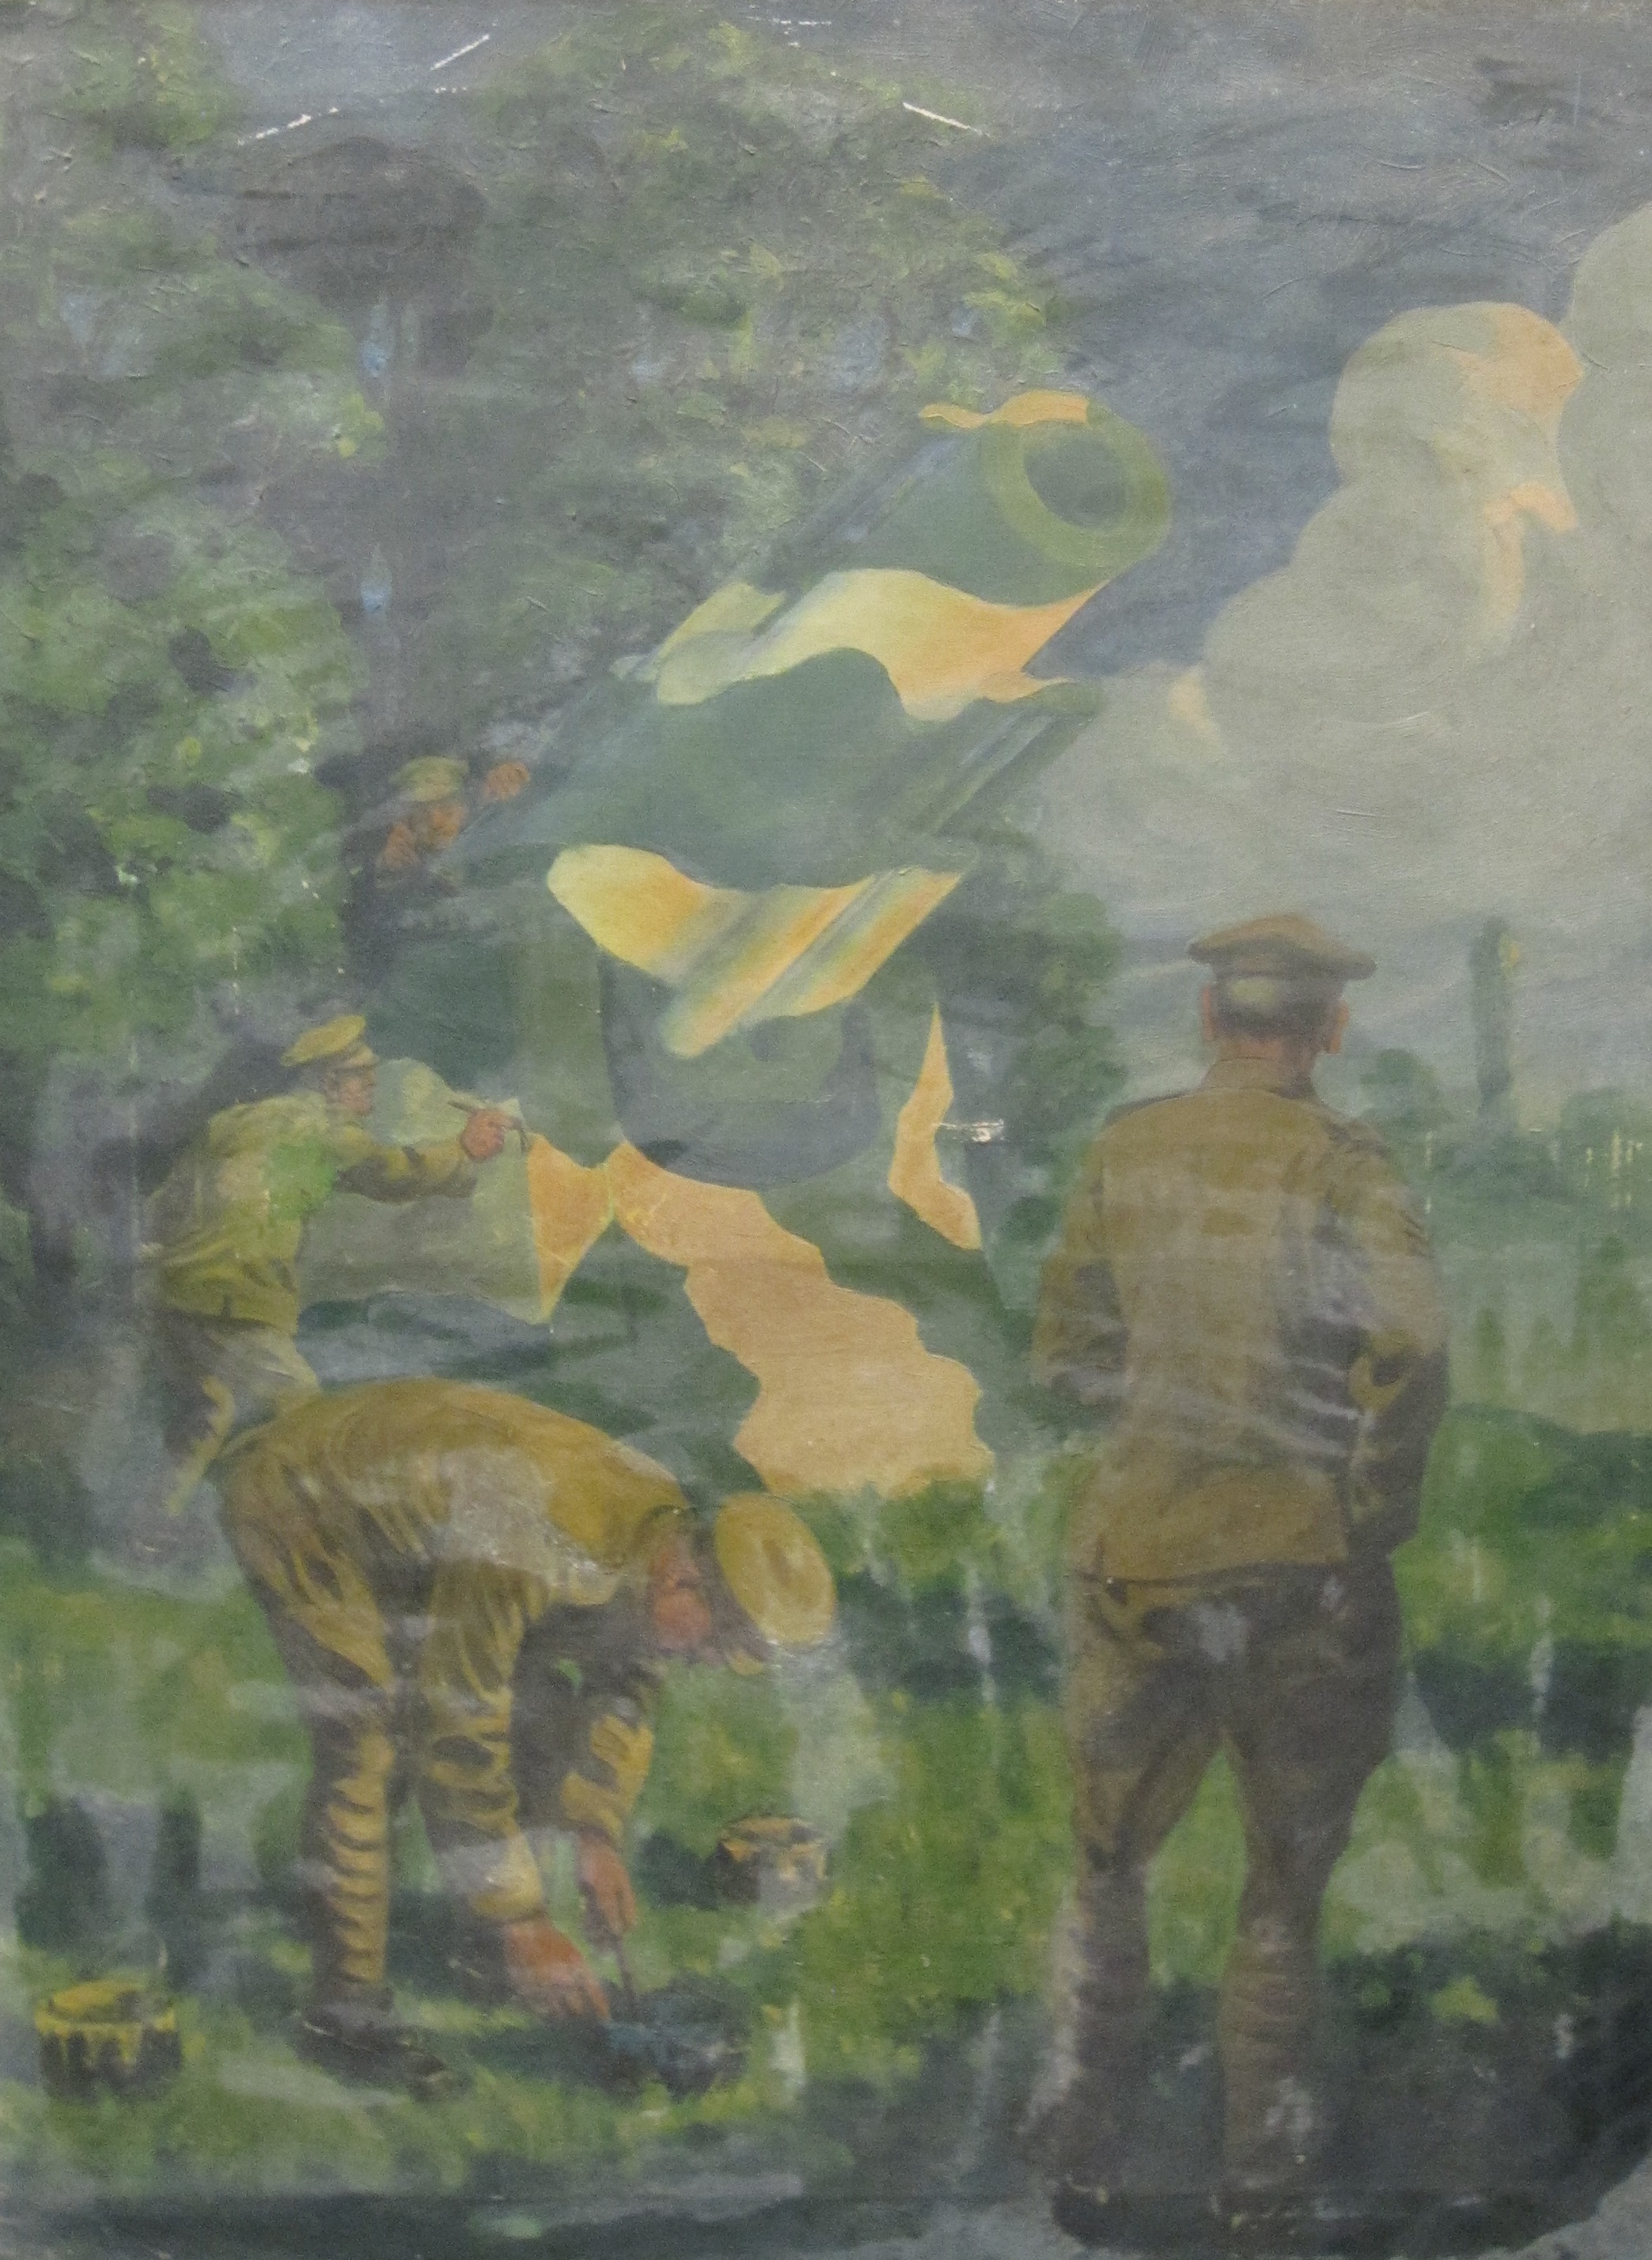 FOLLOWER OF CHRISTOPHER RICHARD W. NEVINSON (1889-1946)Soldiers camouflaging a heavy Field Gunoil on